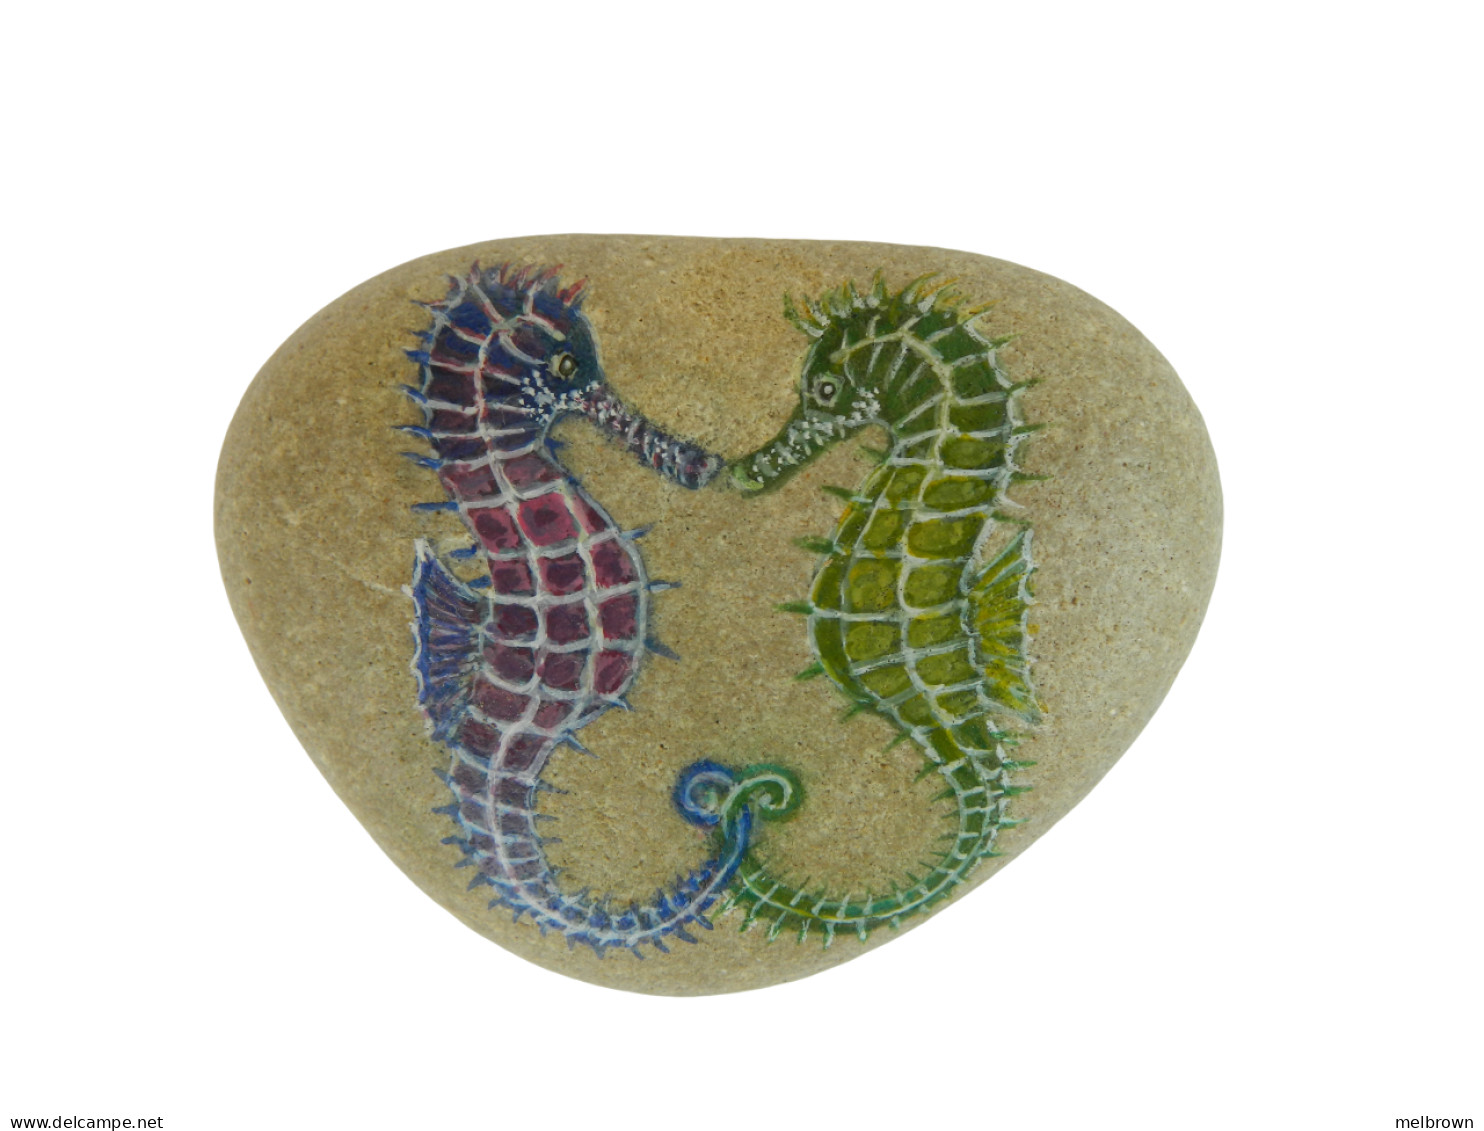 Seahorses Hand Painted On A Heart-Shaped Beach Stone Paperweight - Tiere